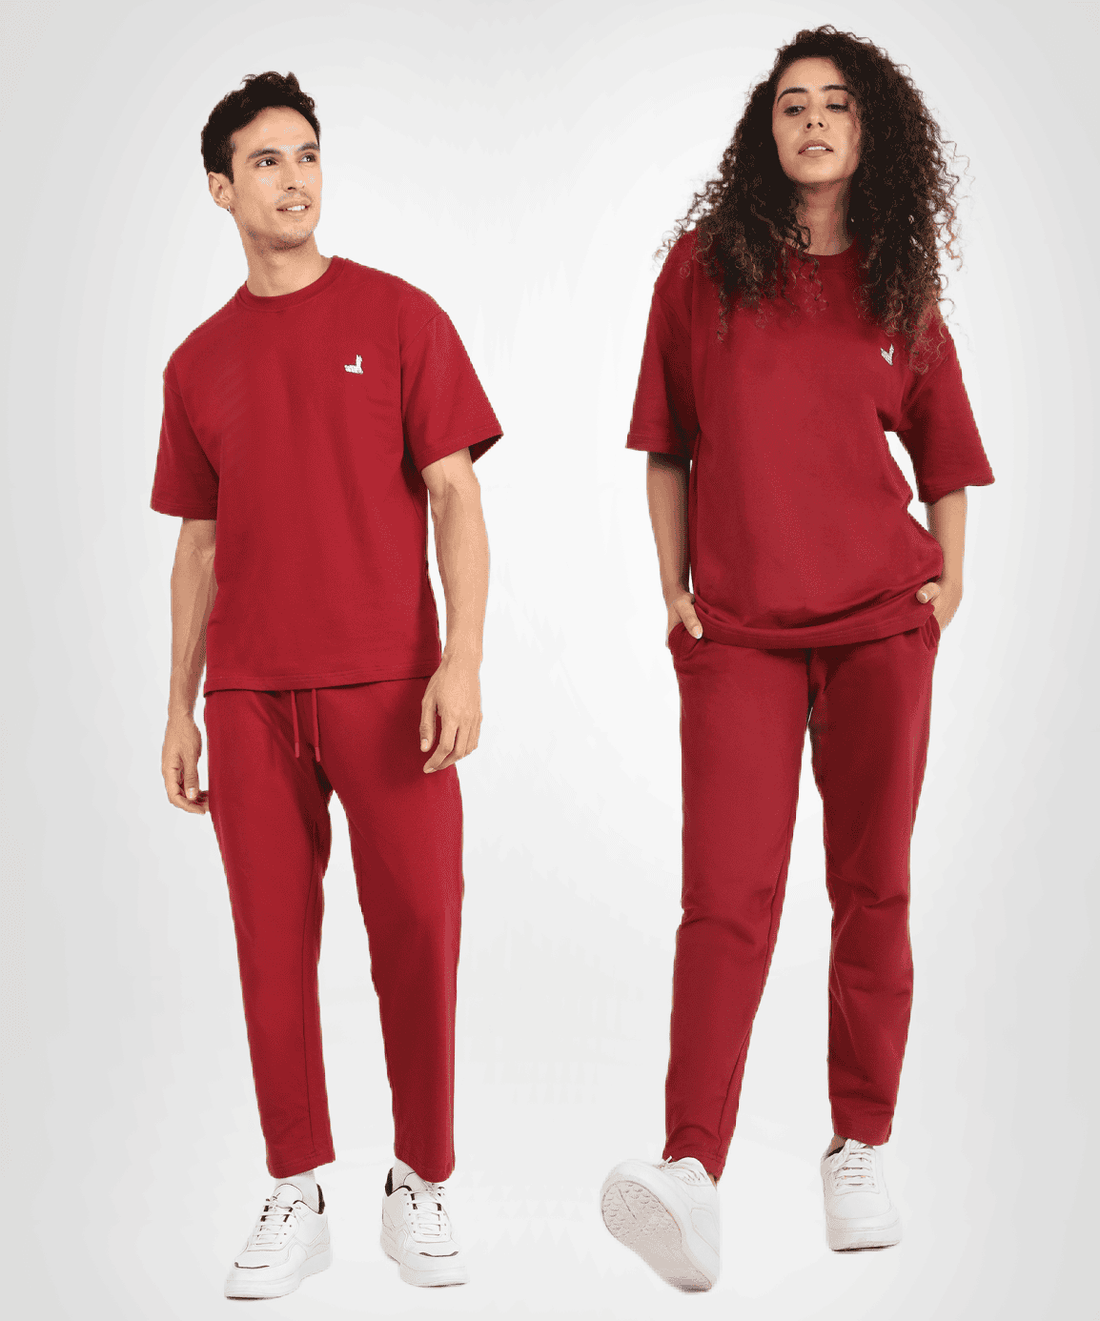 Red Hot Co-ord Pants & Tee Set